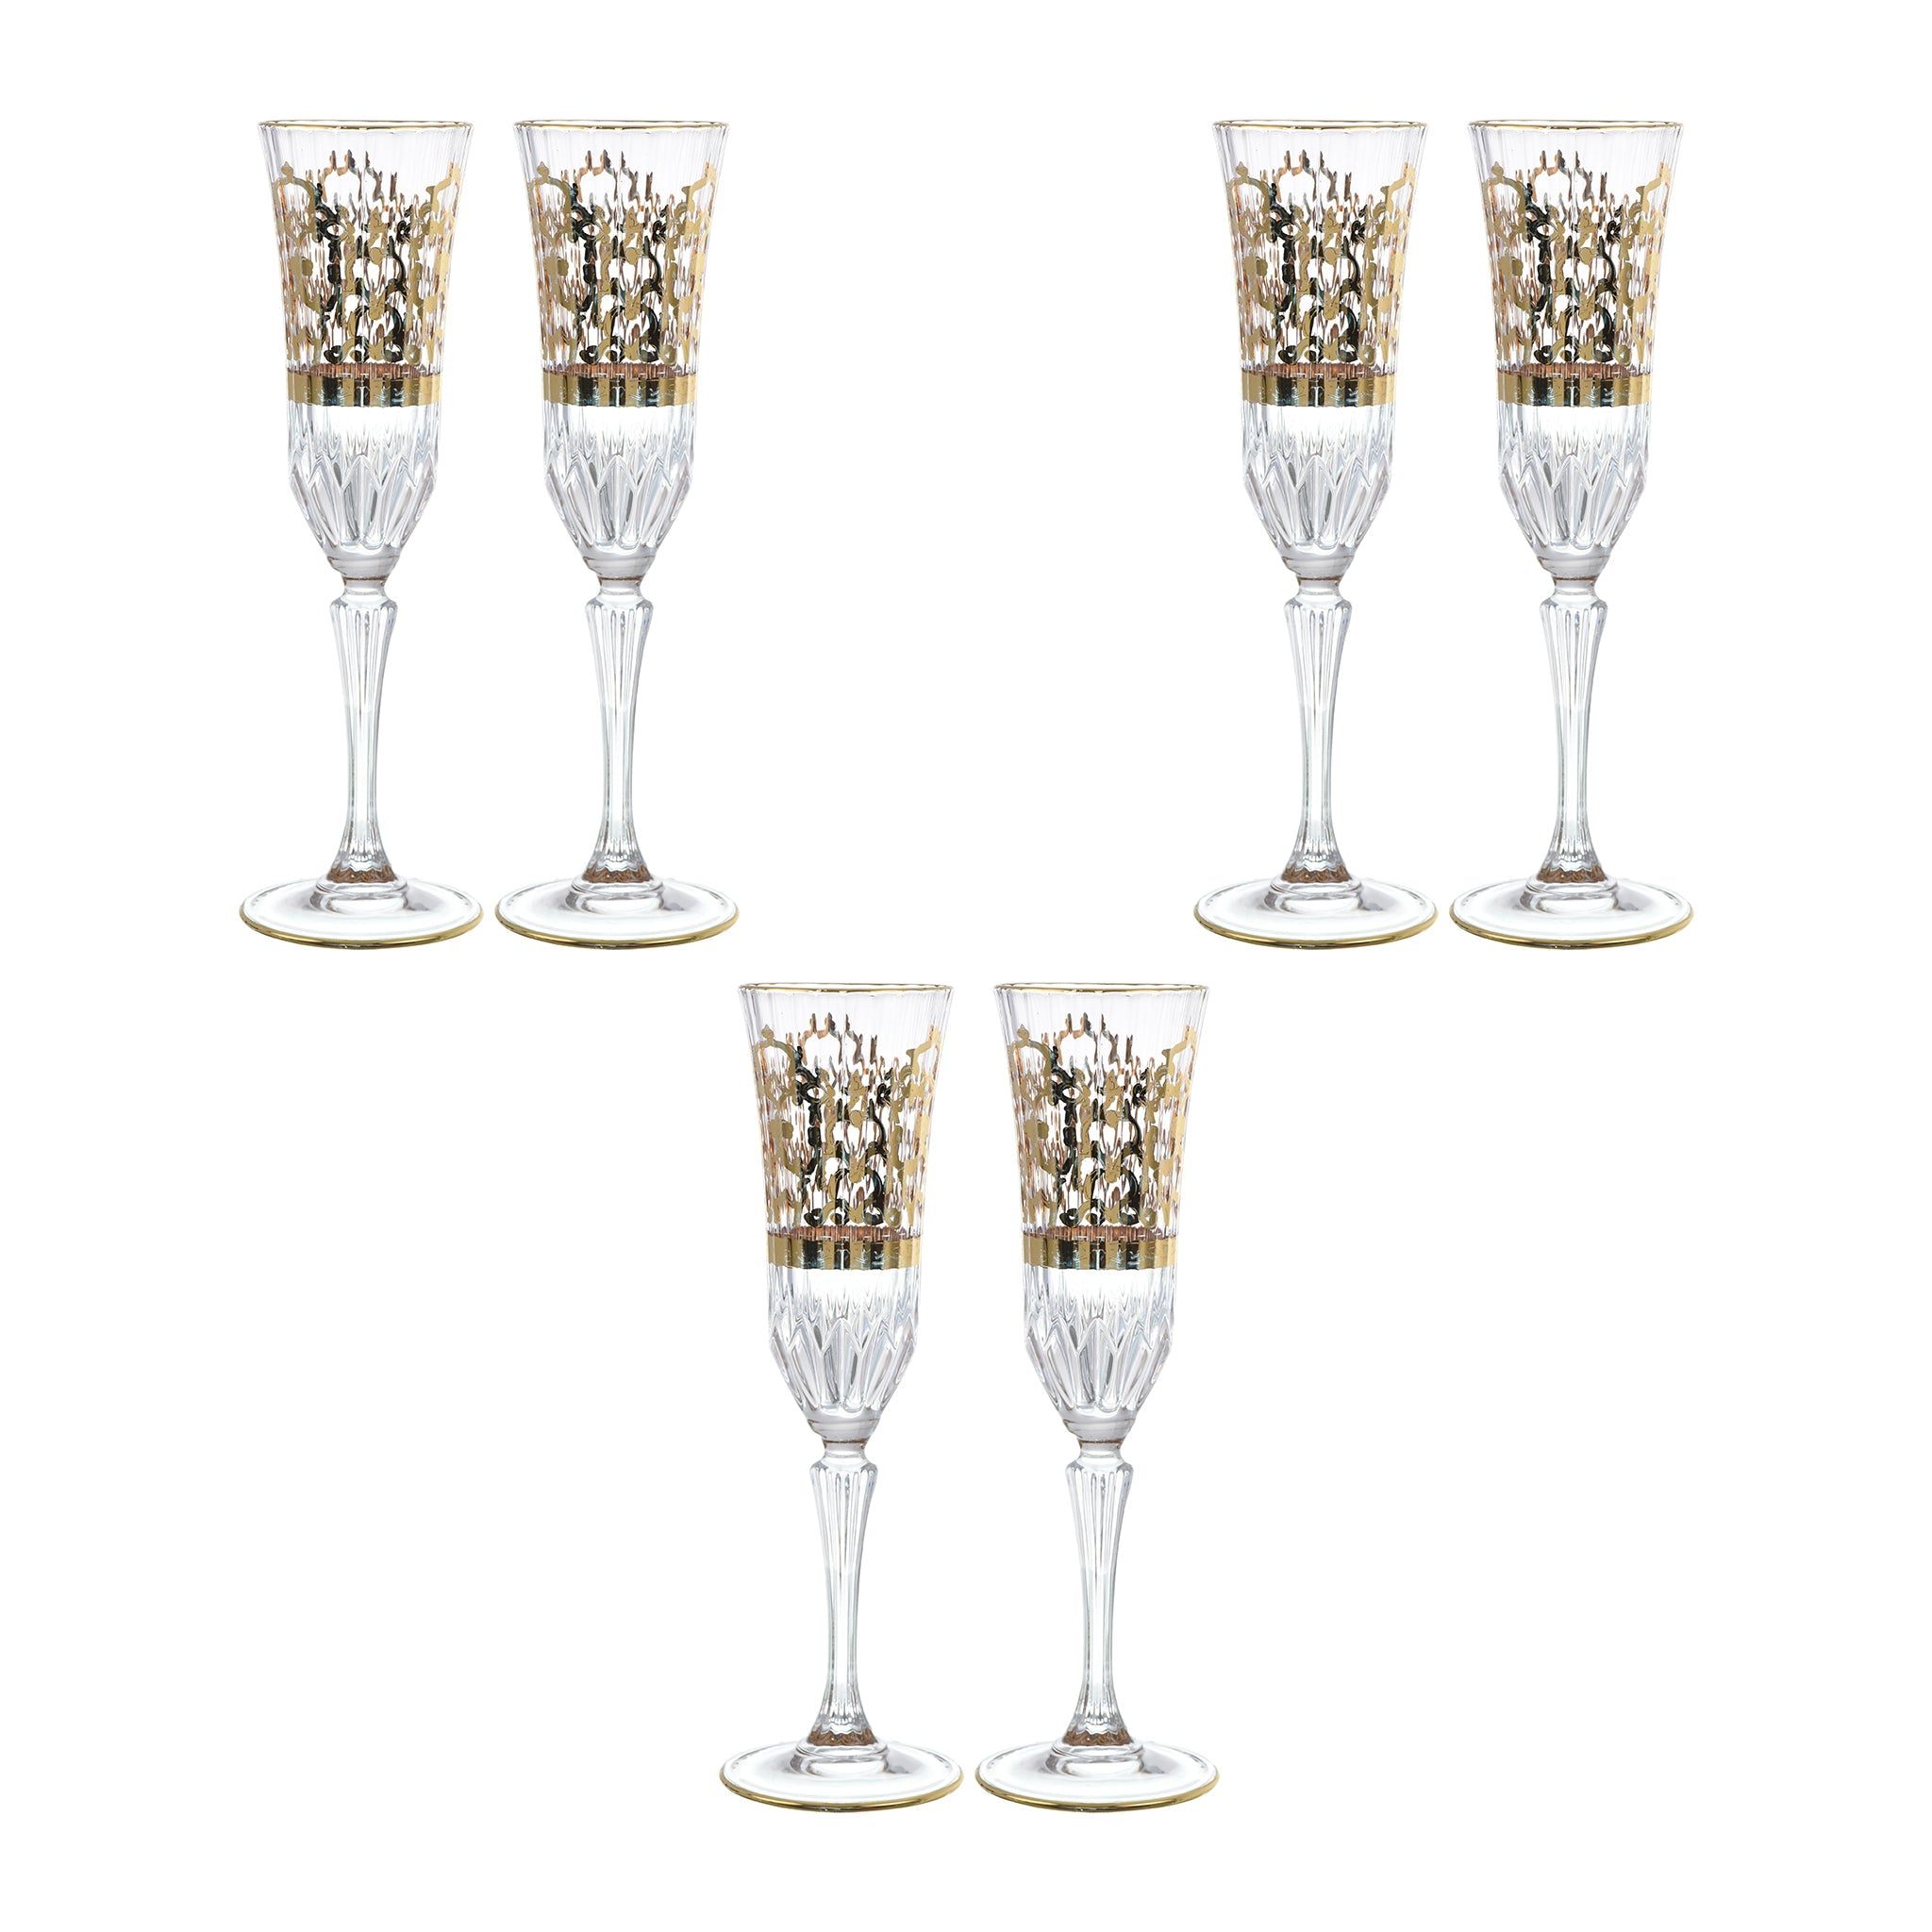 RCR Italy - Flute Glass Set 6 Pieces - Gold - 190ml - 380003051